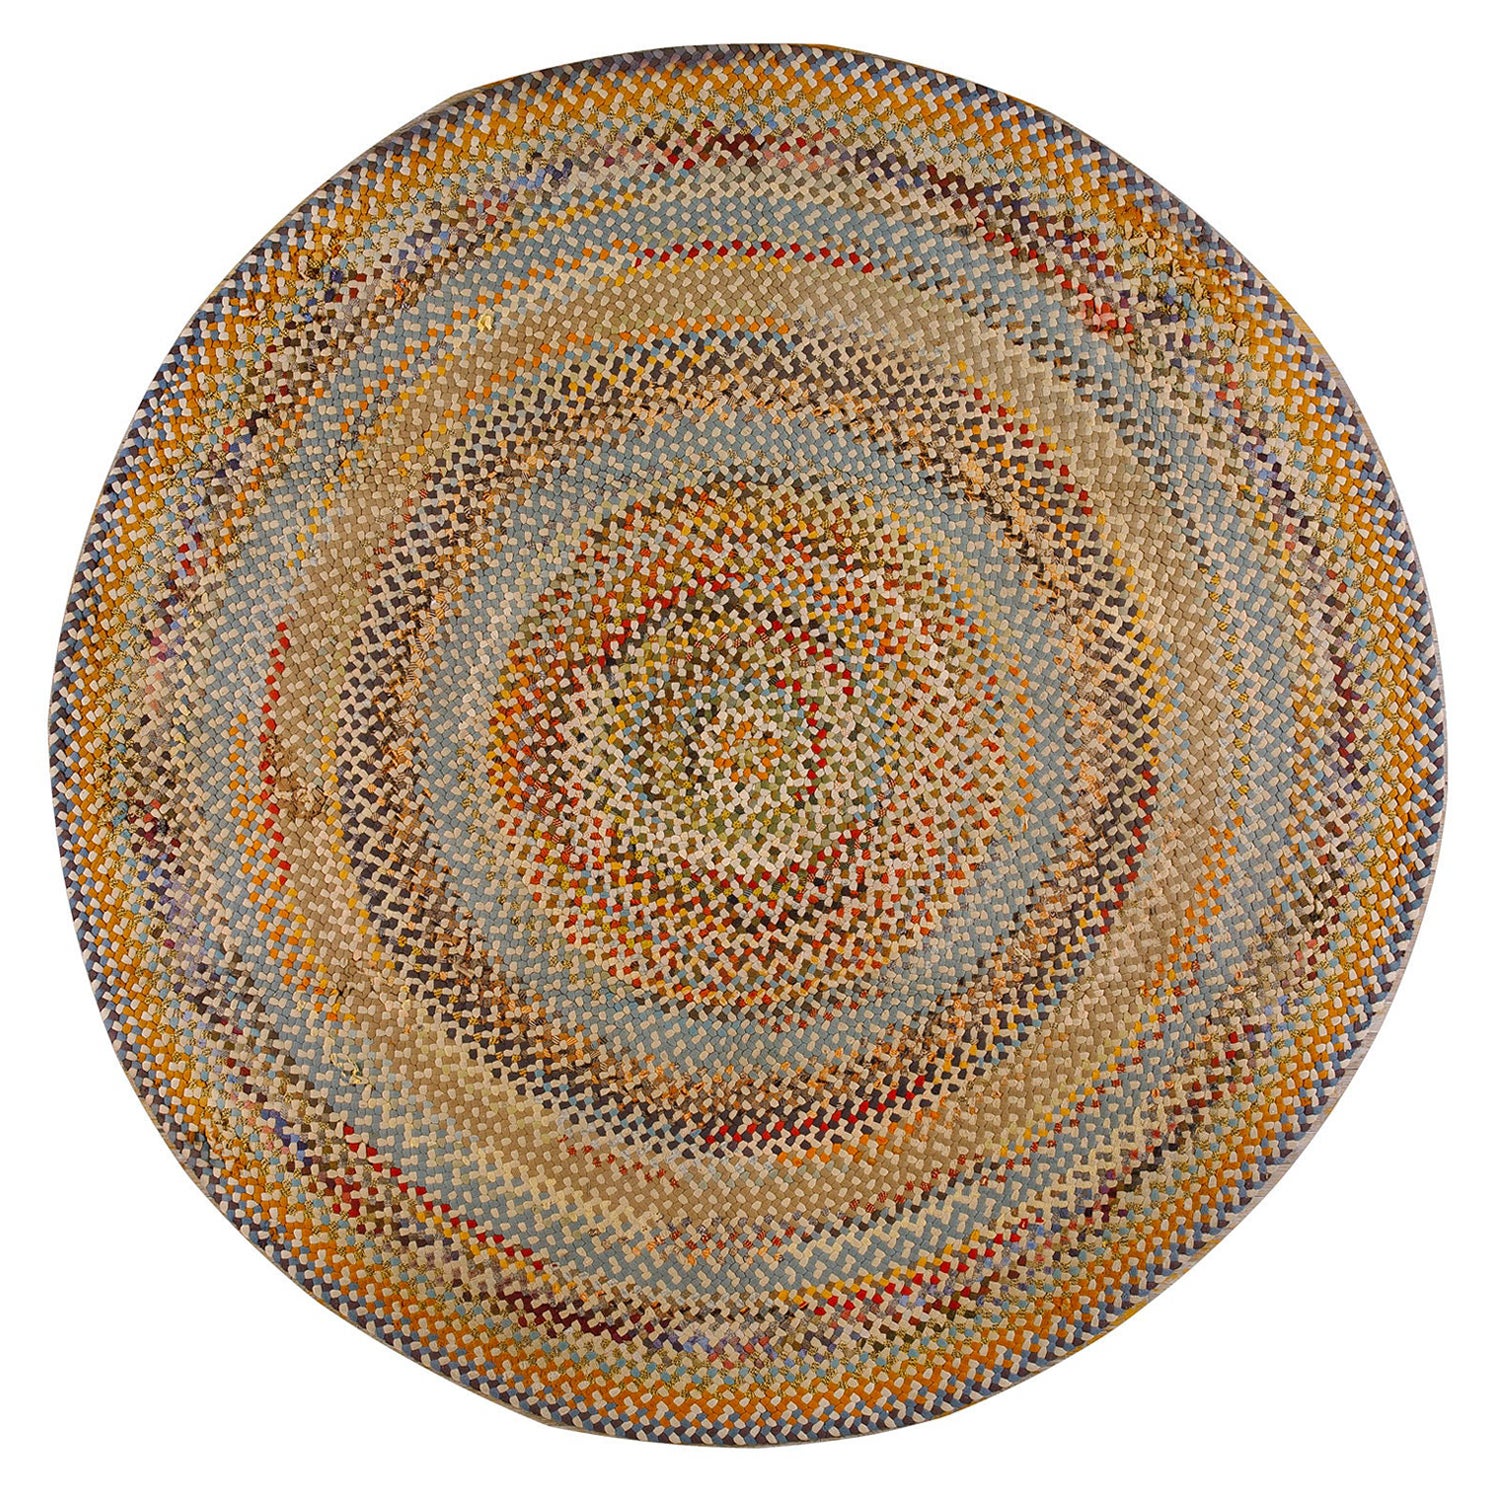 Early 20th Century American Braided Rug ( 8' x 8' - 245 x 245 ) For Sale